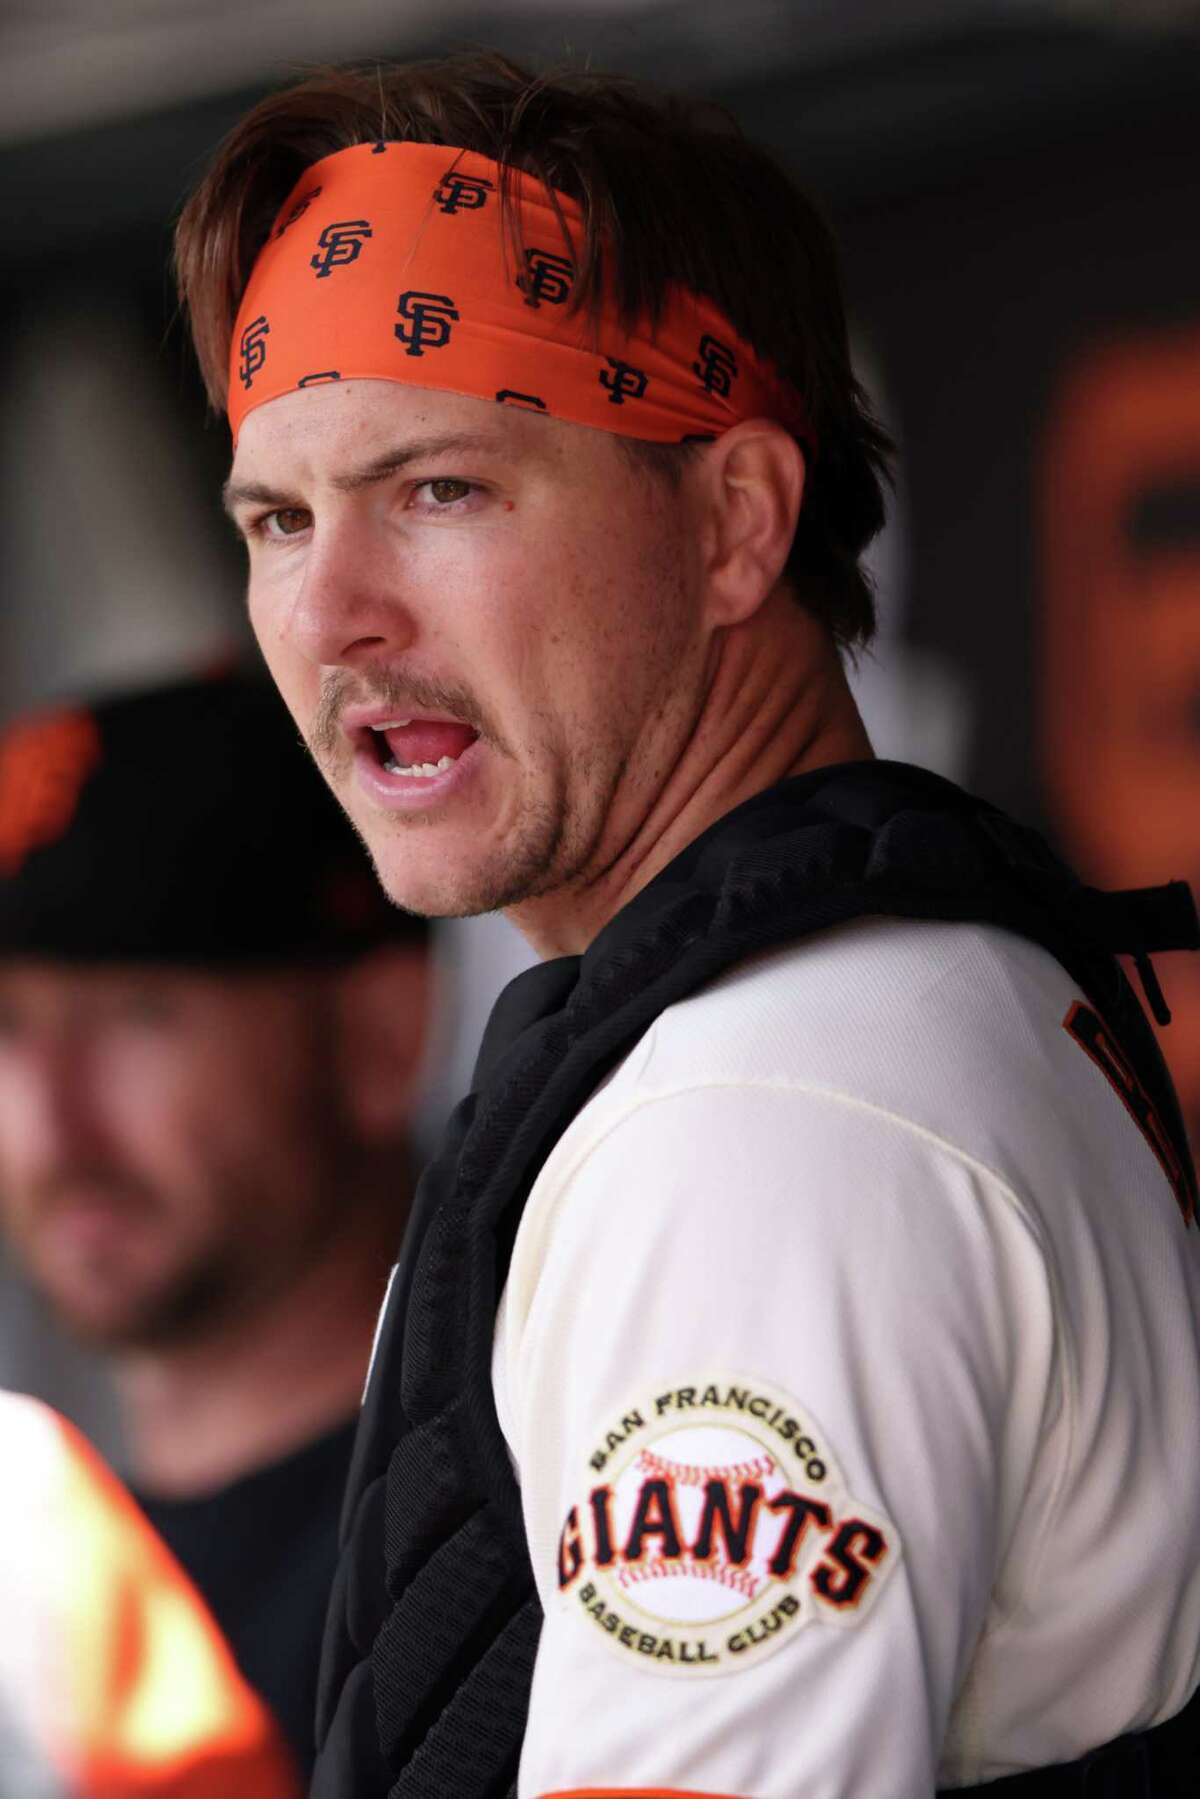 Patrick Bailey trait that stands out to Giants icon Buster Posey